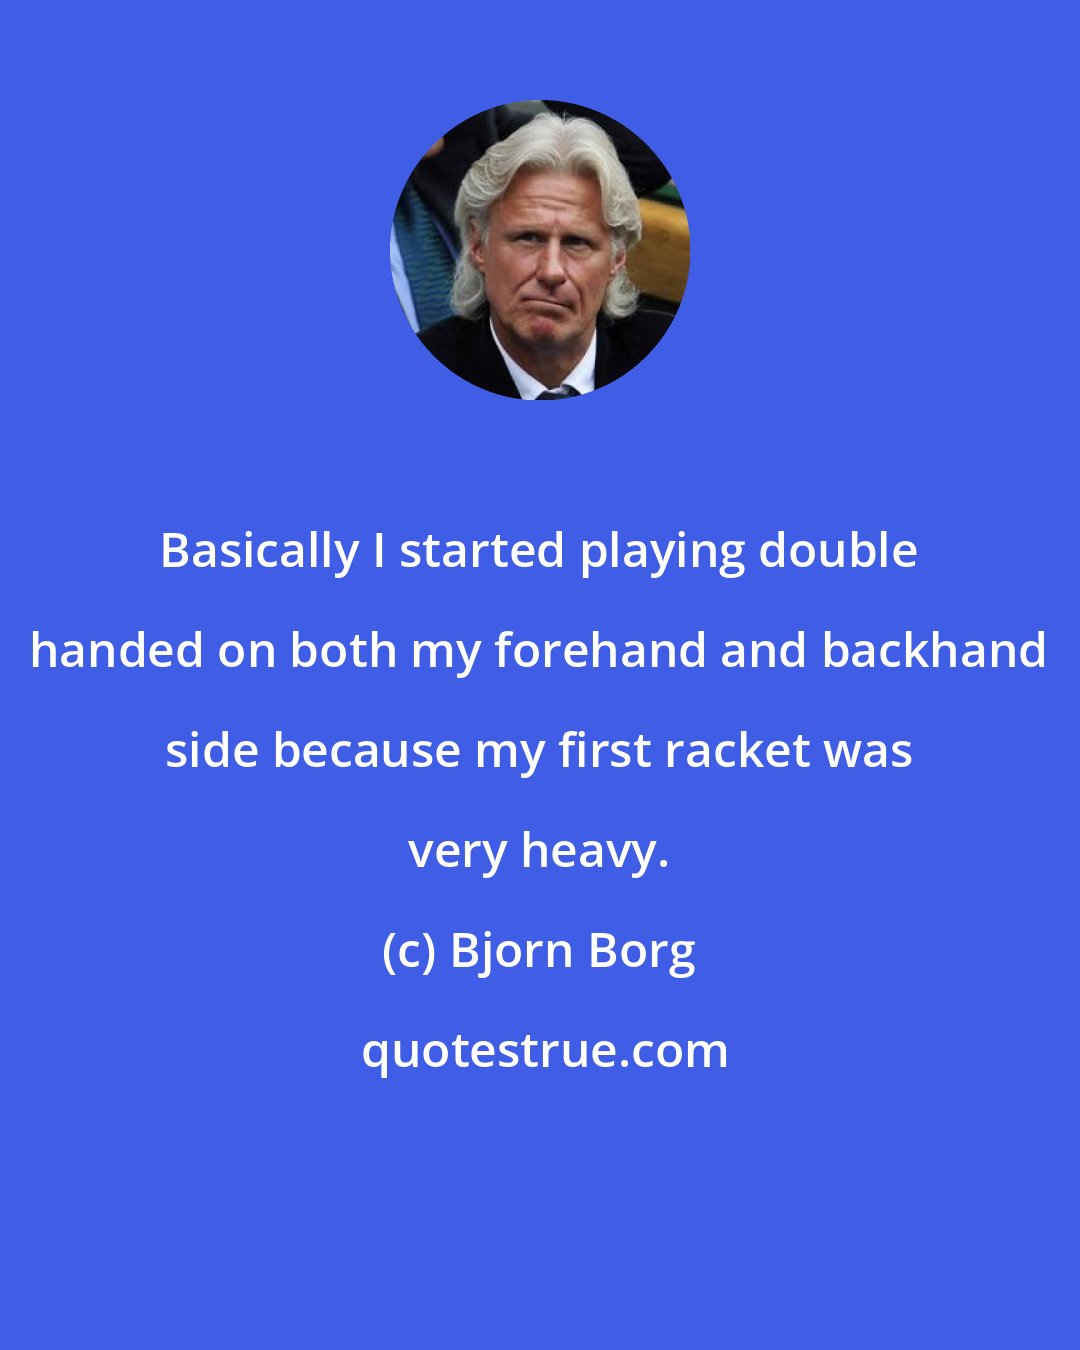 Bjorn Borg: Basically I started playing double handed on both my forehand and backhand side because my first racket was very heavy.